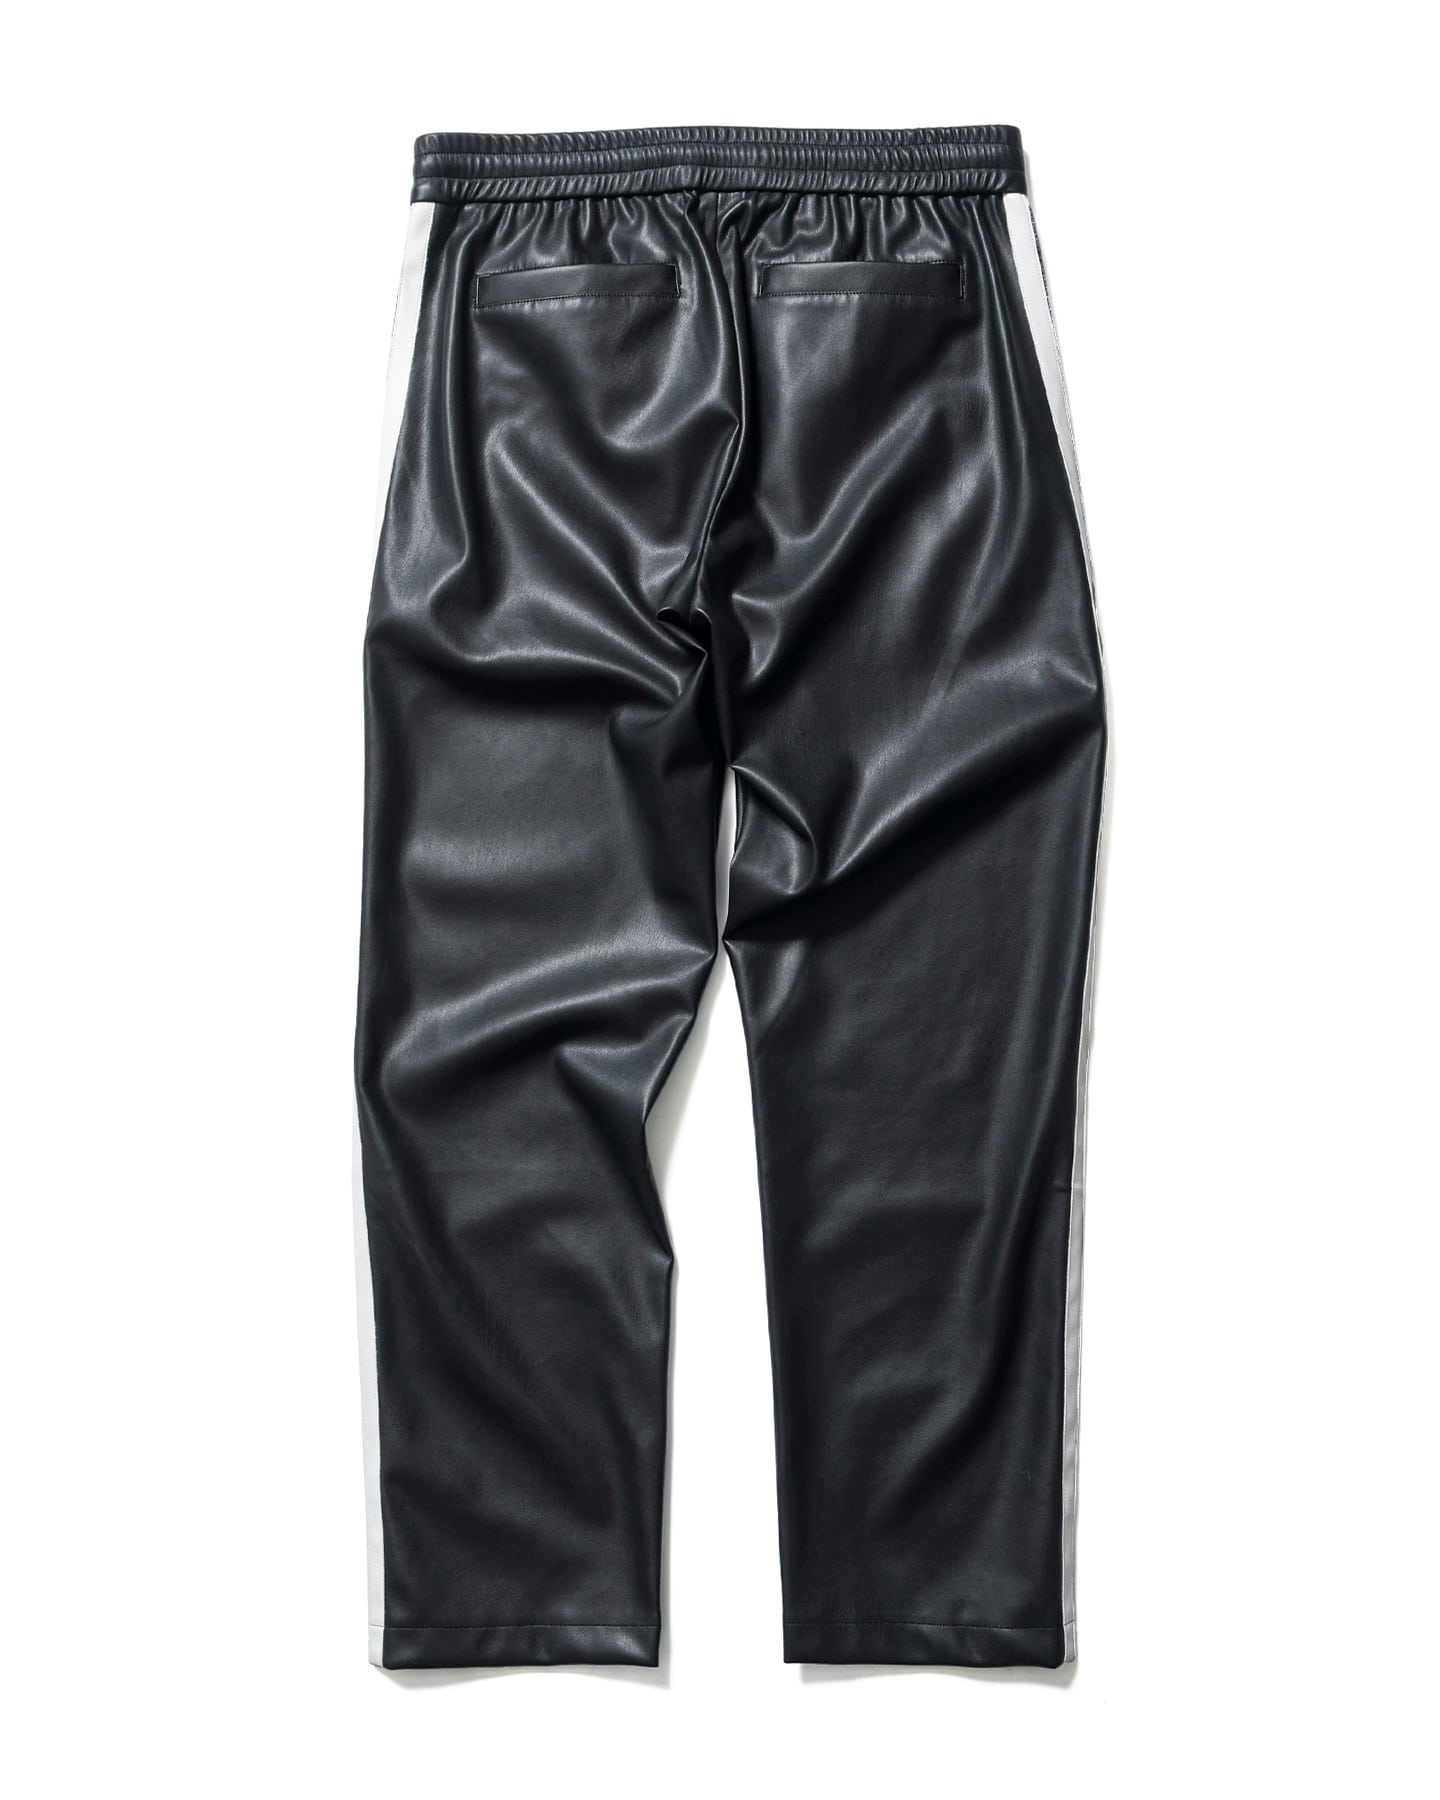 Lサイズ　FCRB 23SS SYNTHETIC LEATHER PANTS未使用タグ付き